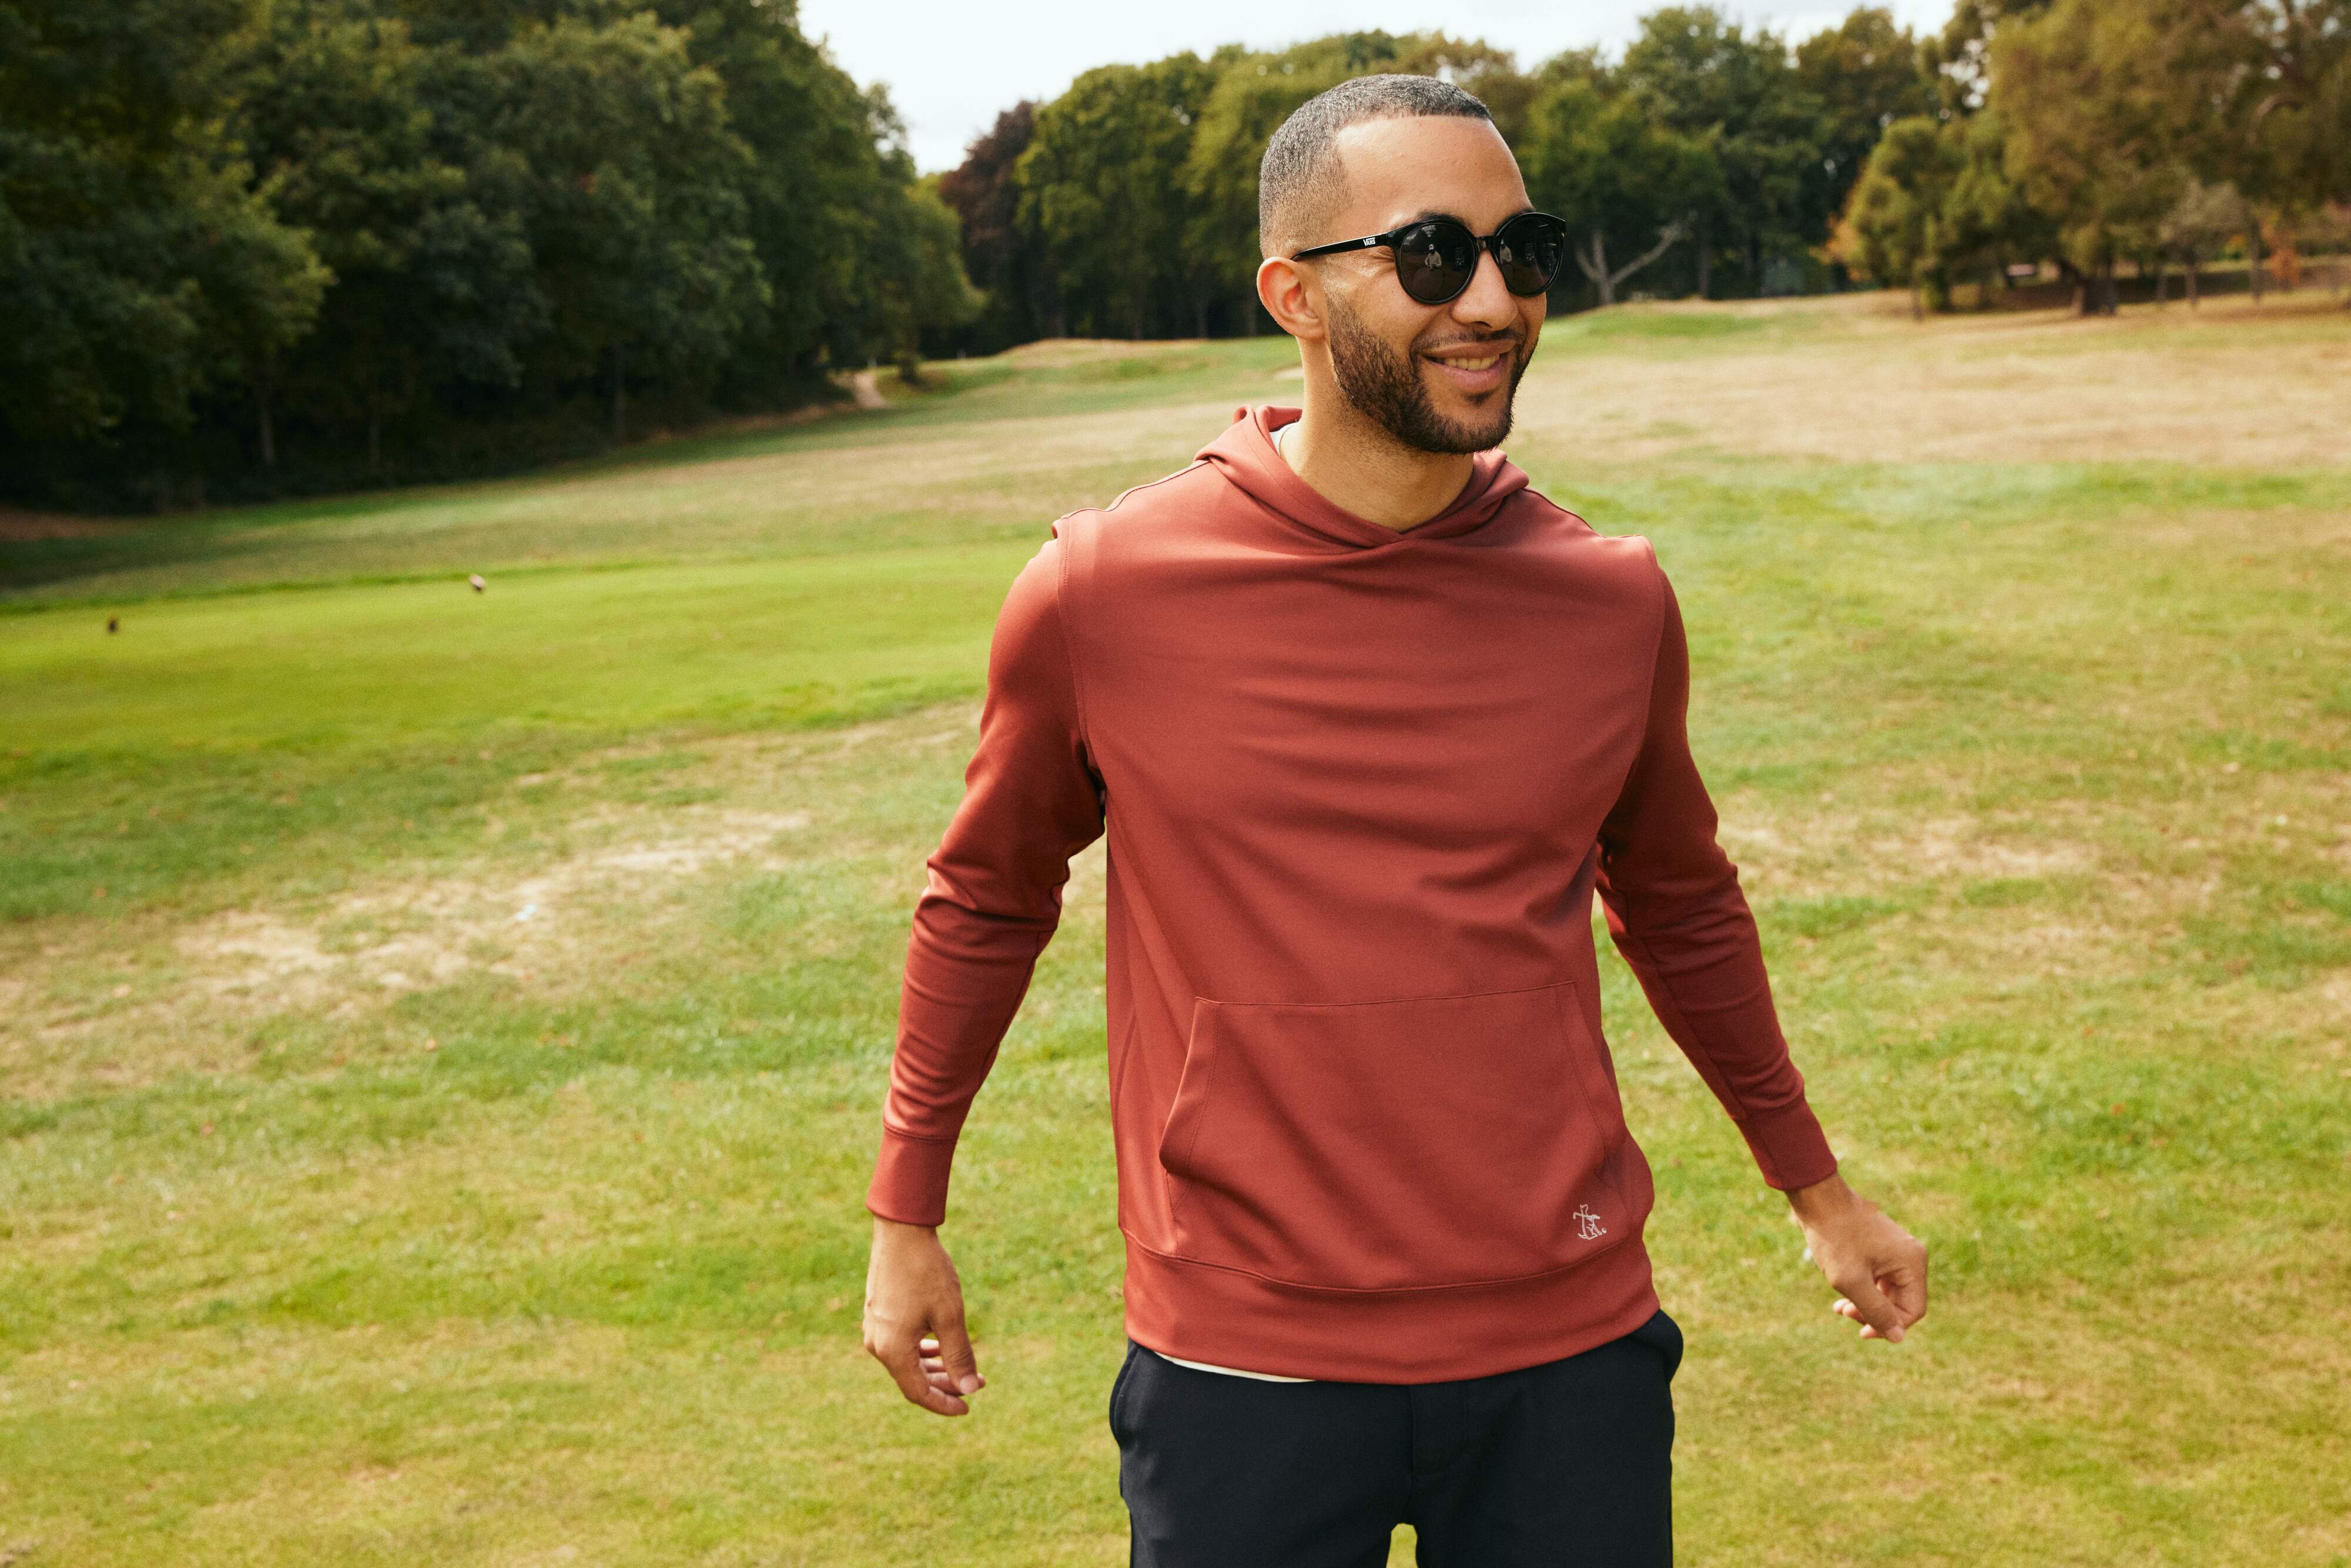 Same as a certain sweater or shirt” – Golf world reacts to wearing joggers  on the golf course